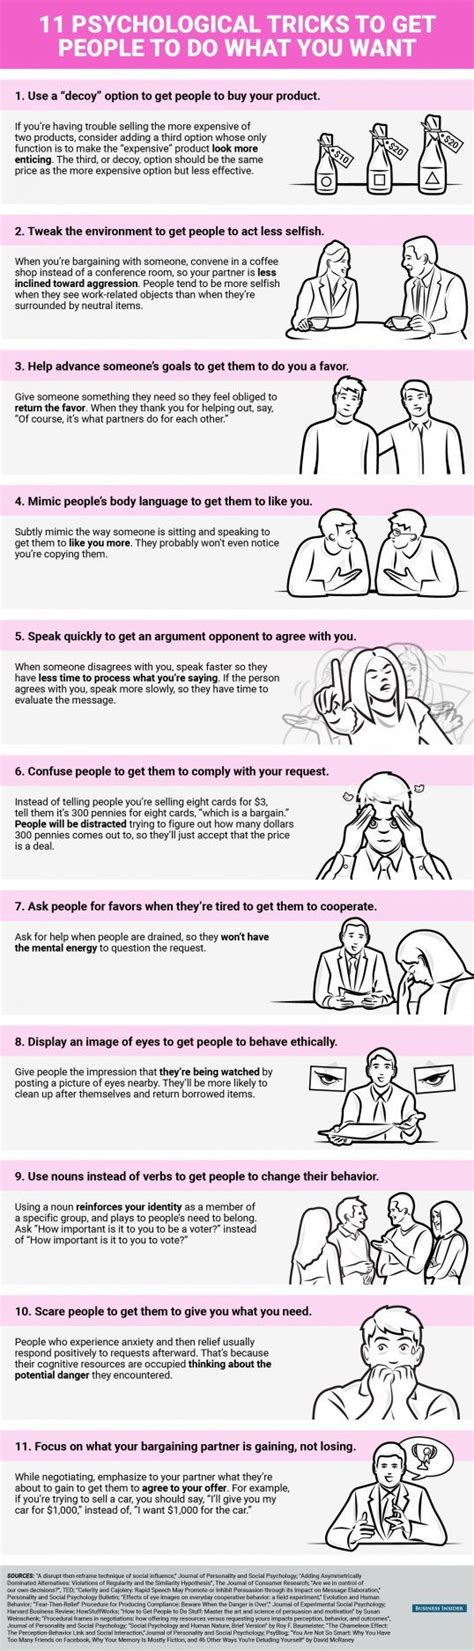 11 Incredible Psychological Tricks To Get People To Do What You Want How To Influence People